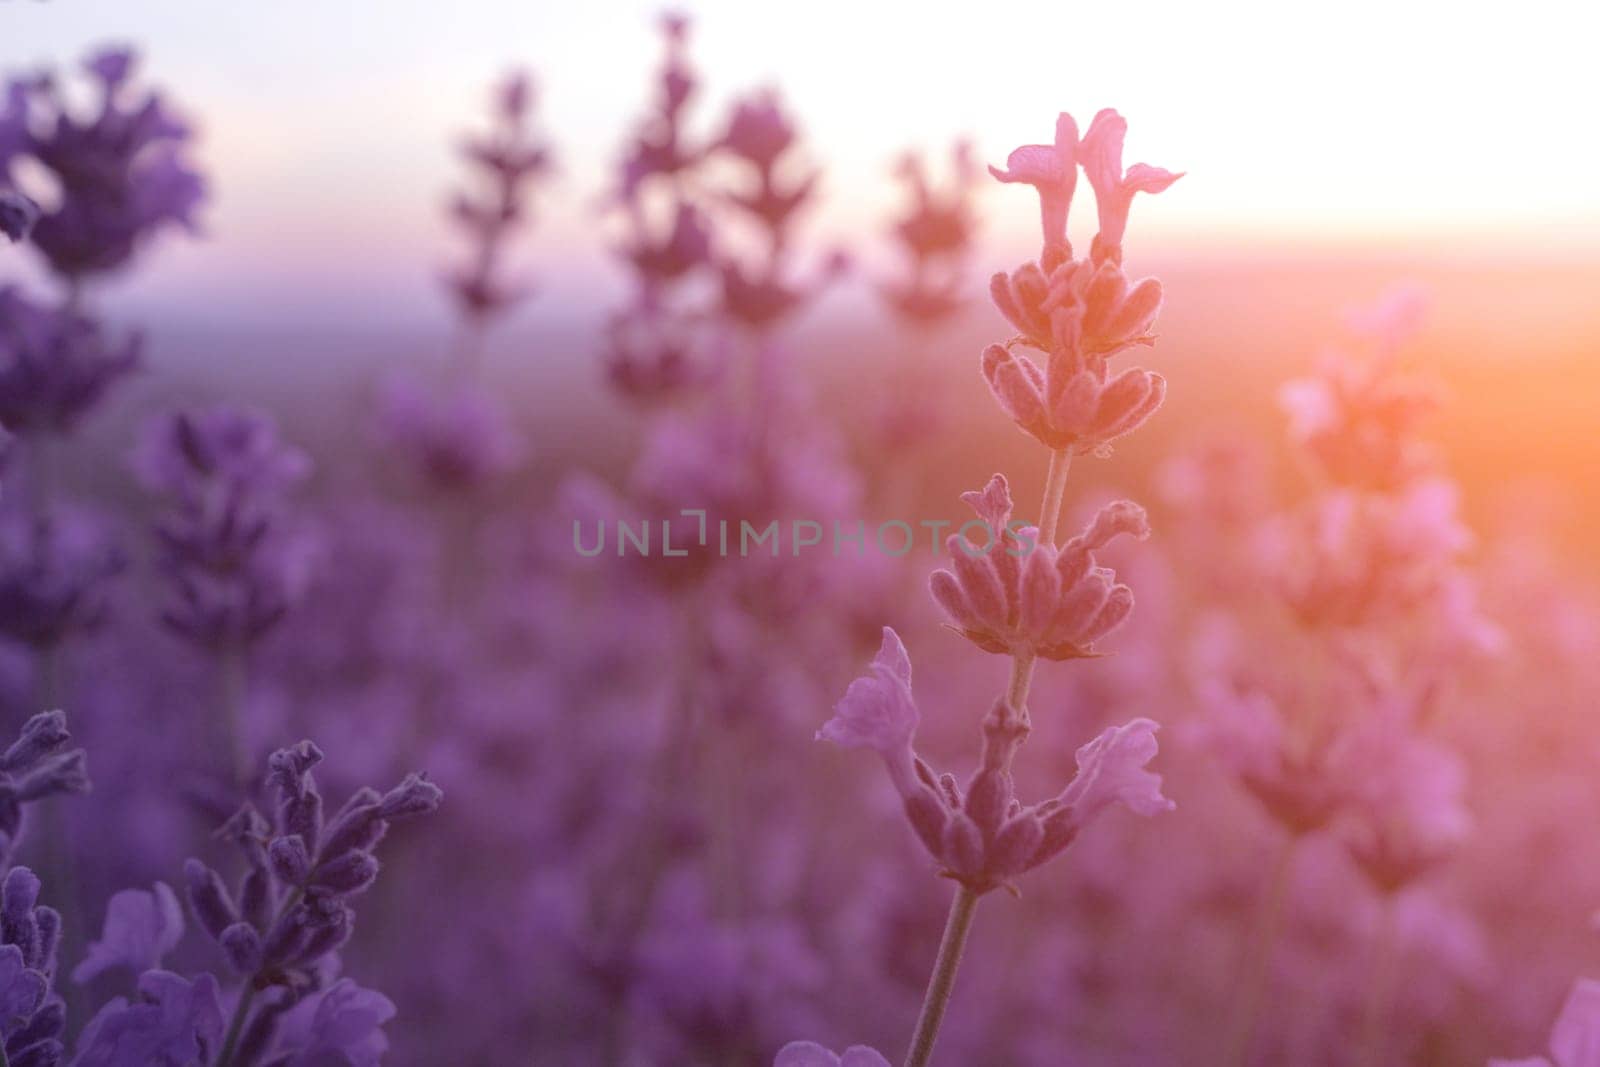 Lavender flower field closeup on sunset, fresh purple aromatic flowers for natural background. Design template for lifestyle illustration. Violet lavender field in Provence, France. by panophotograph